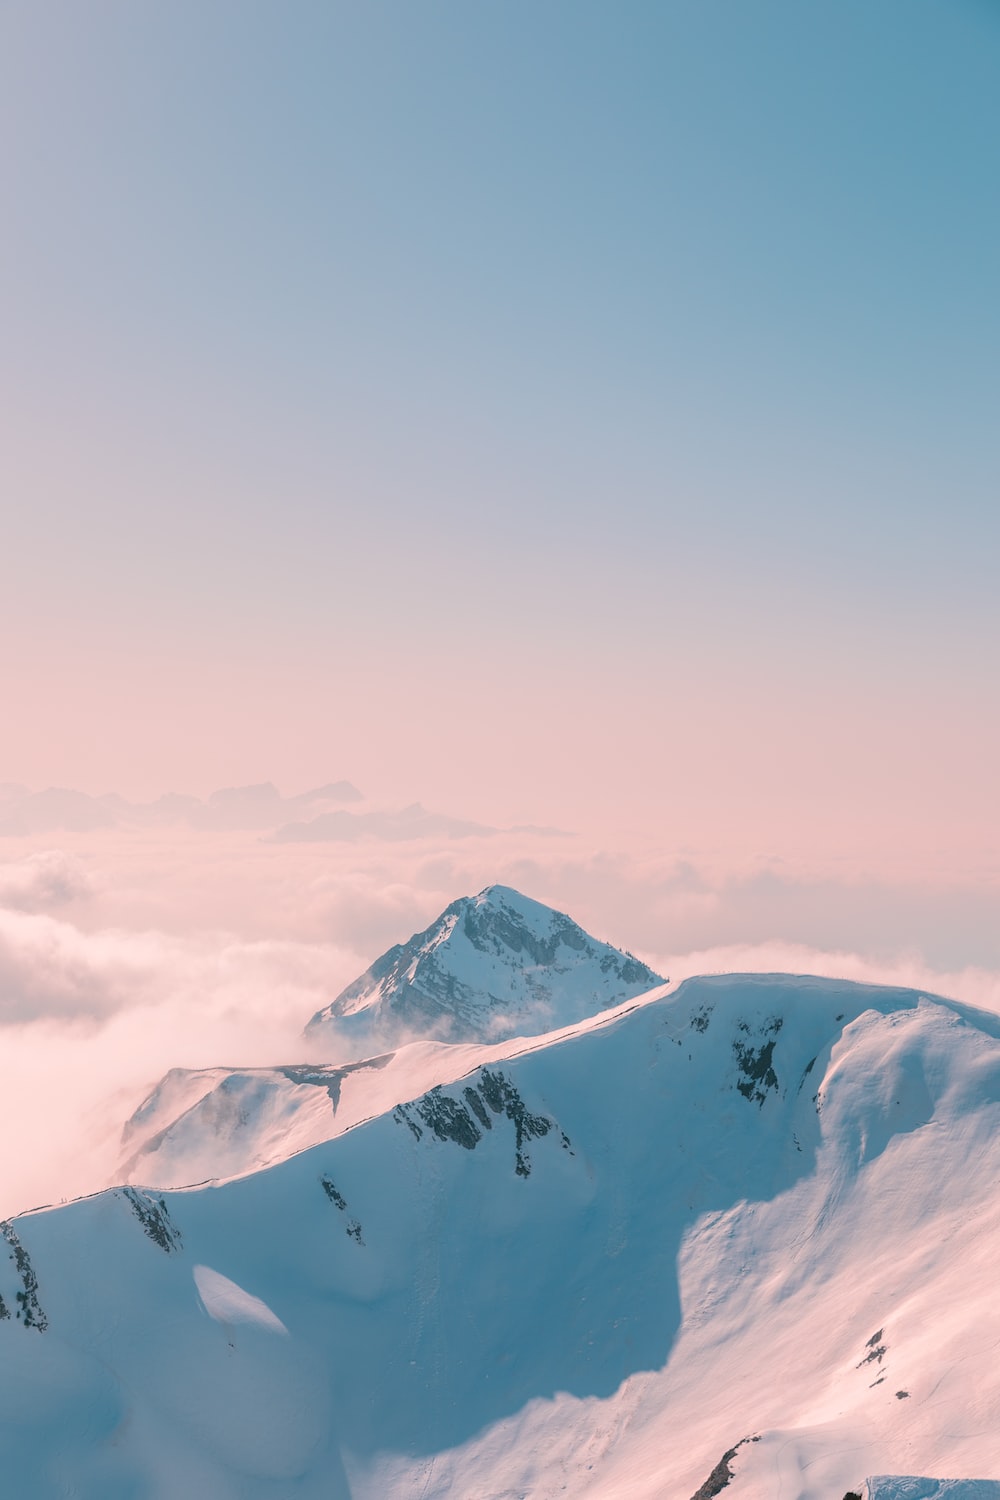 A snow covered mountain peak with a pink and blue sky - Clean